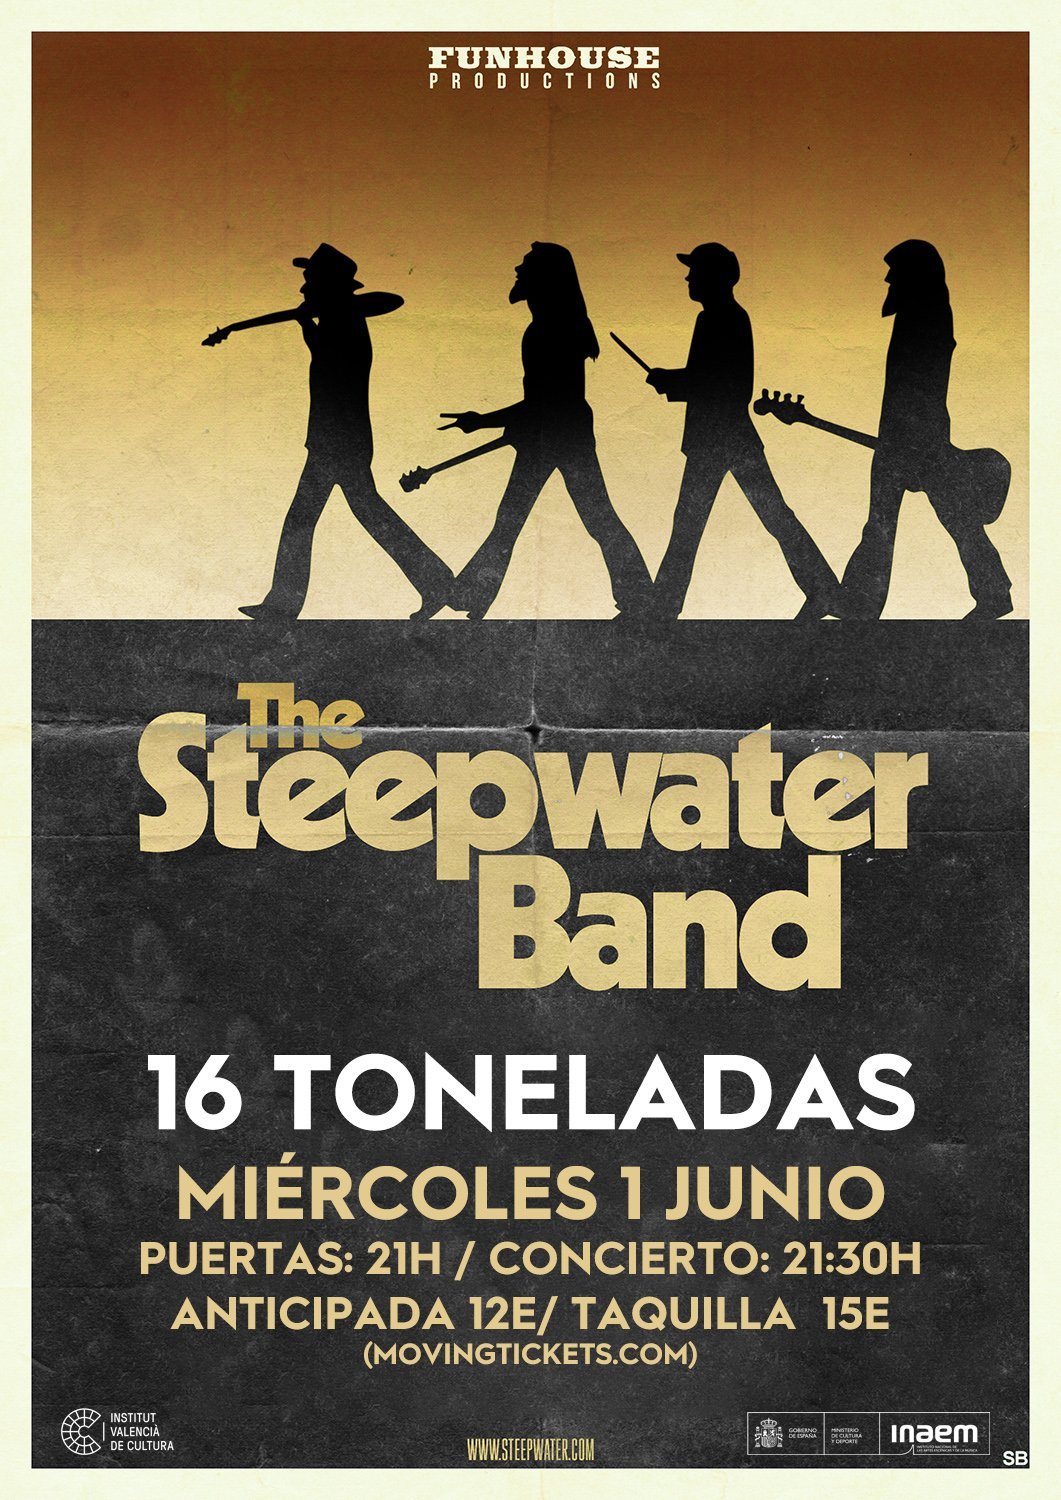 The STEEPWATER BAND en Valencia - Mutick